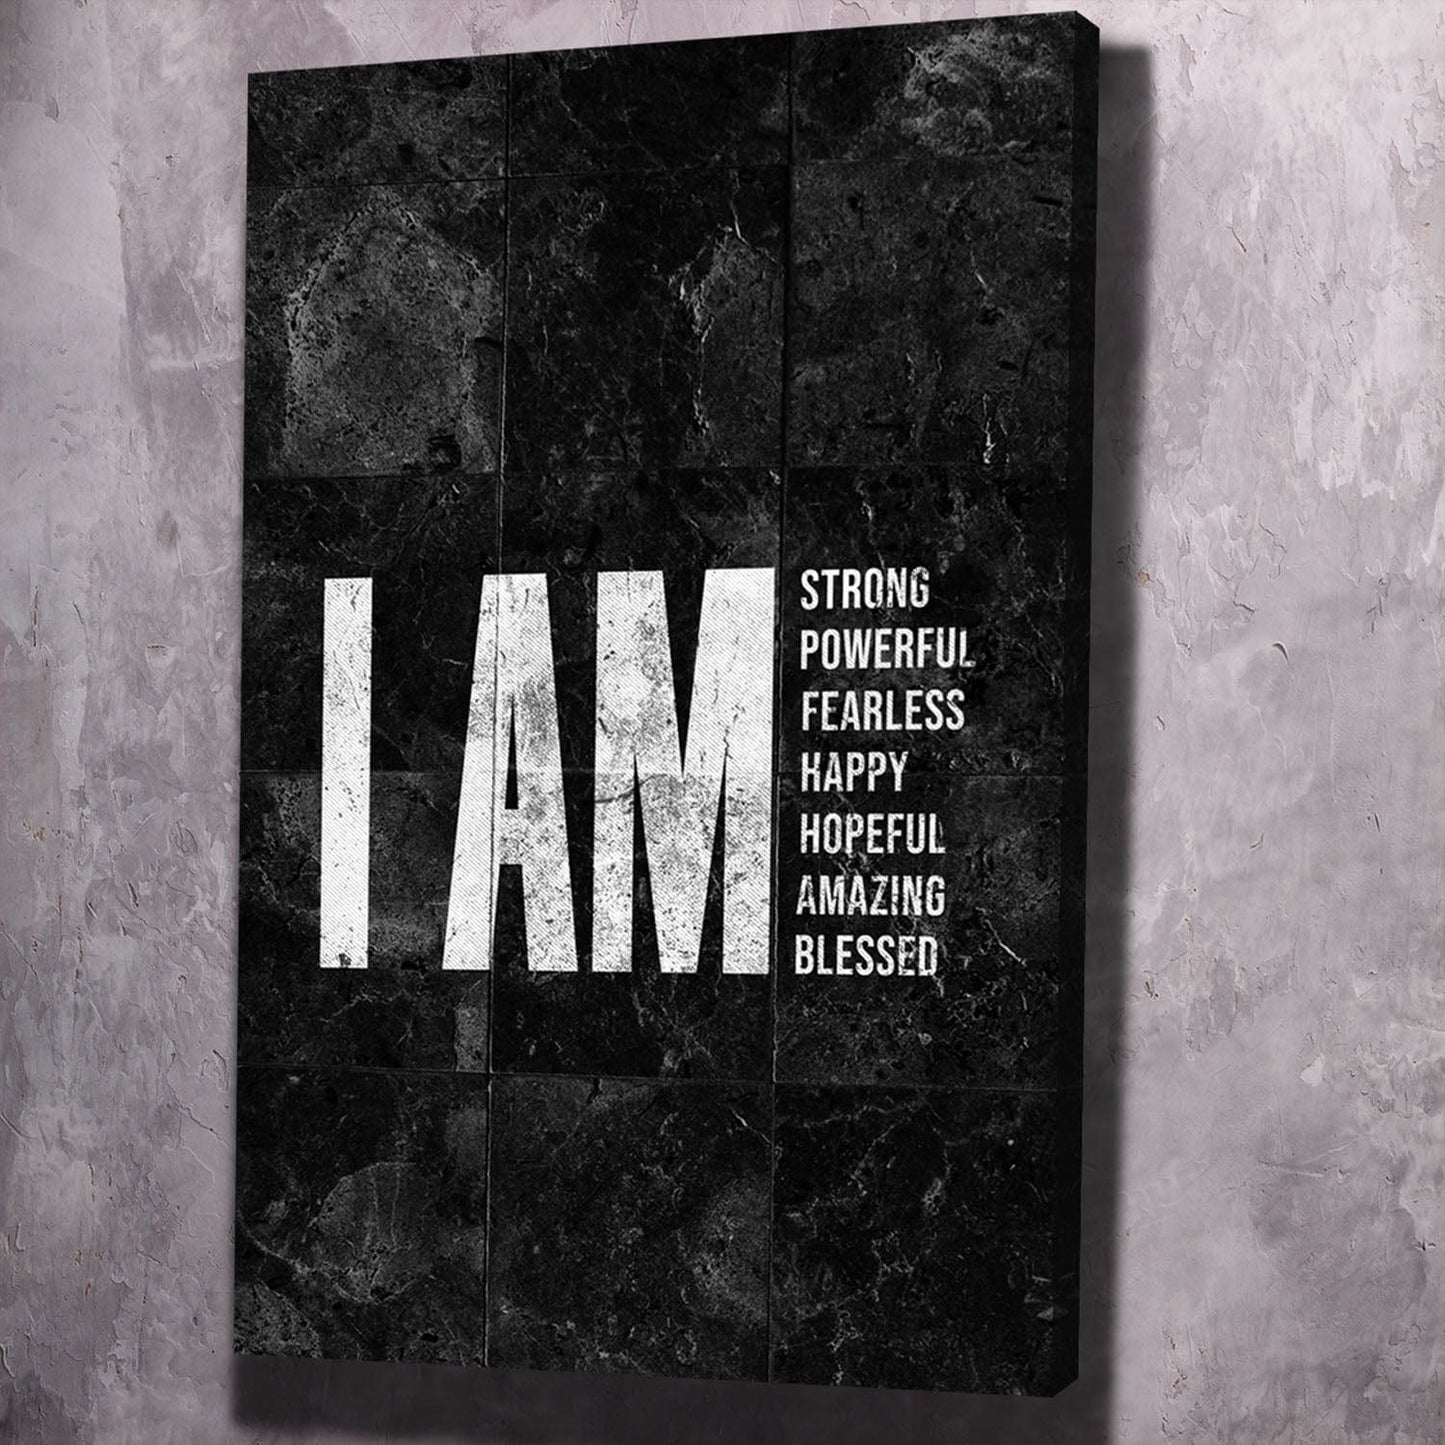 I AM Strong, Powerful, Fearless, Happy, Hopeful, Amazing, Blessed Wall Art | Inspirational Wall Art Motivational Wall Art Quotes Office Art | ImpaktMaker Exclusive Canvas Art Portrait